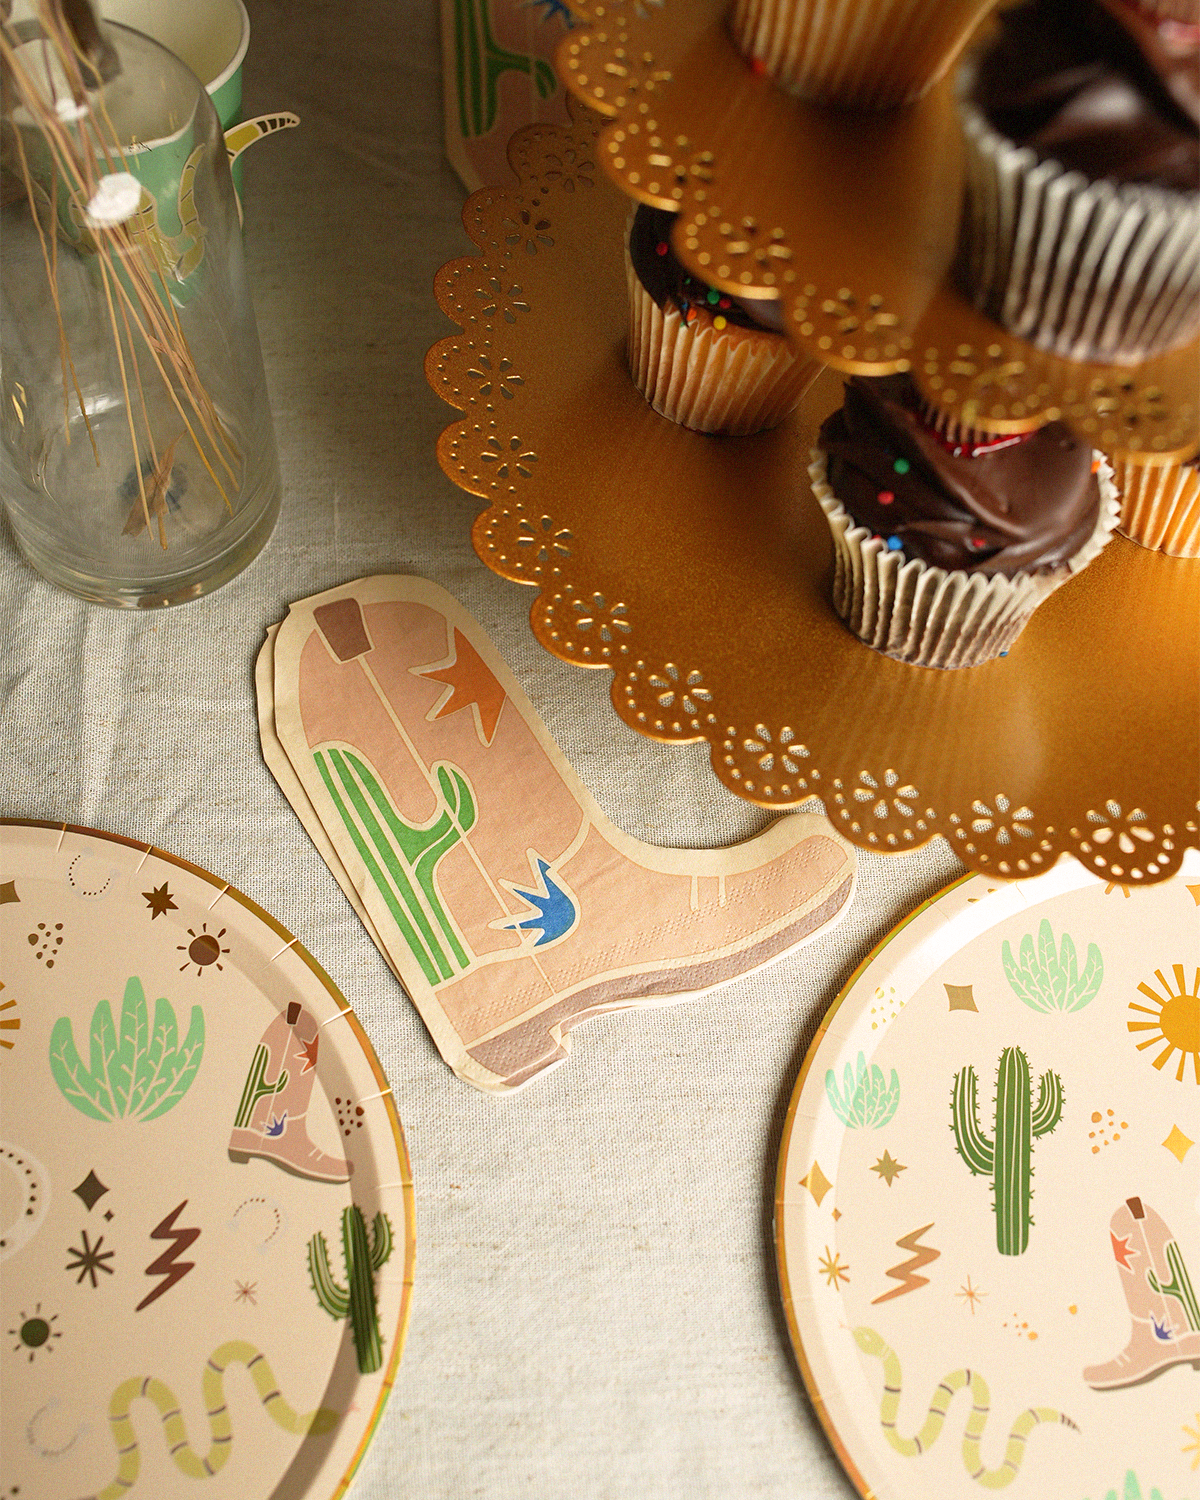 Sssssnake Catcher Dinner Plates (x 12)These sensational gold foil cowboy plates are the perfect addition to your Western-themed party, creating an exciting tablescape that's bound to impress your guests.POP party suppliesSssssnake Catcher Dinner Plates western theme paper plates